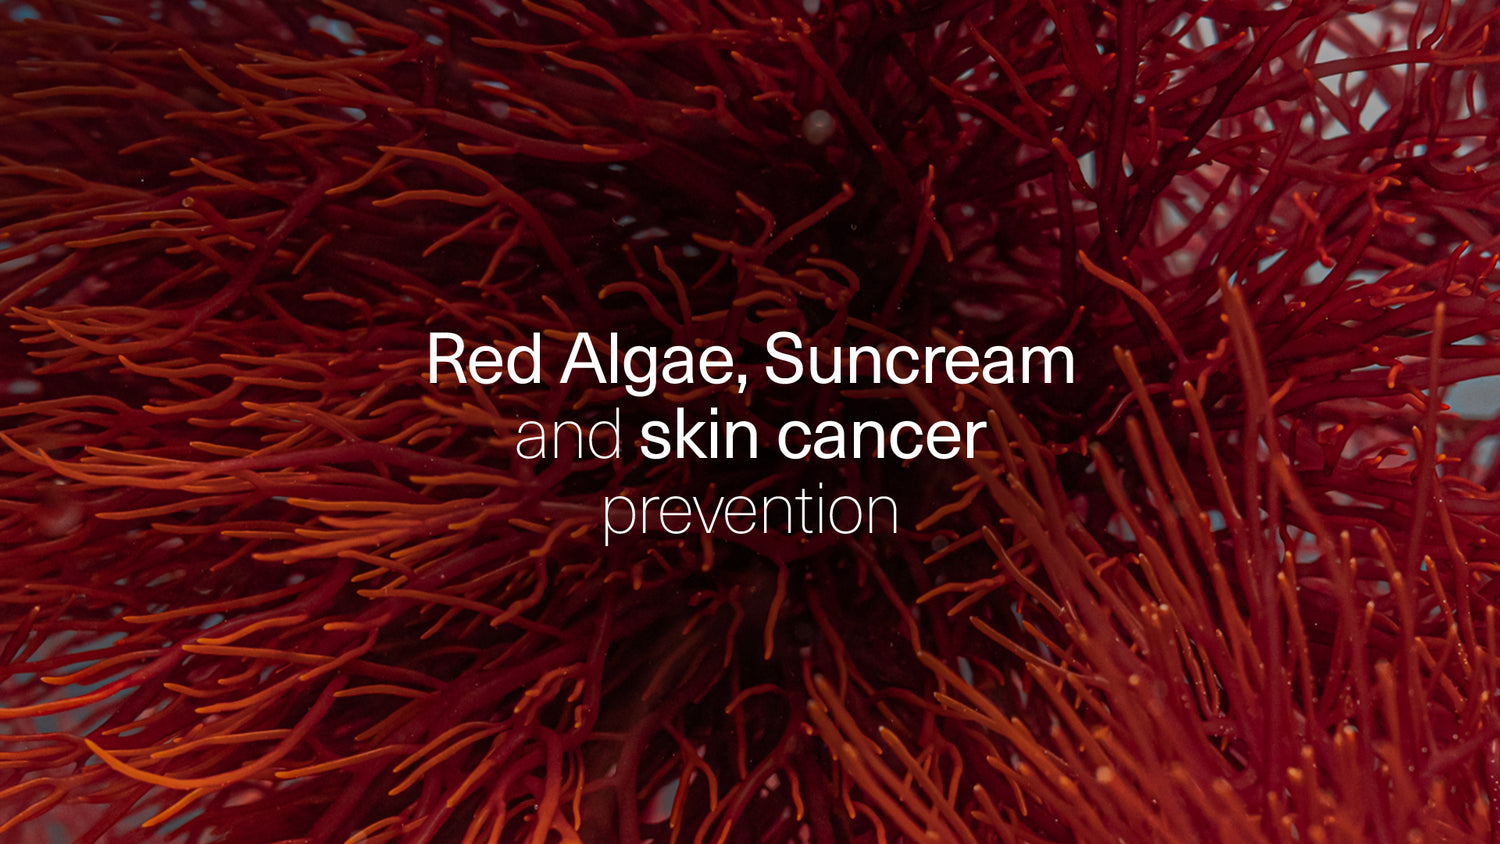 Red Algae, Suncream and skin cancer prevention: A Holistic Approach to Skin care